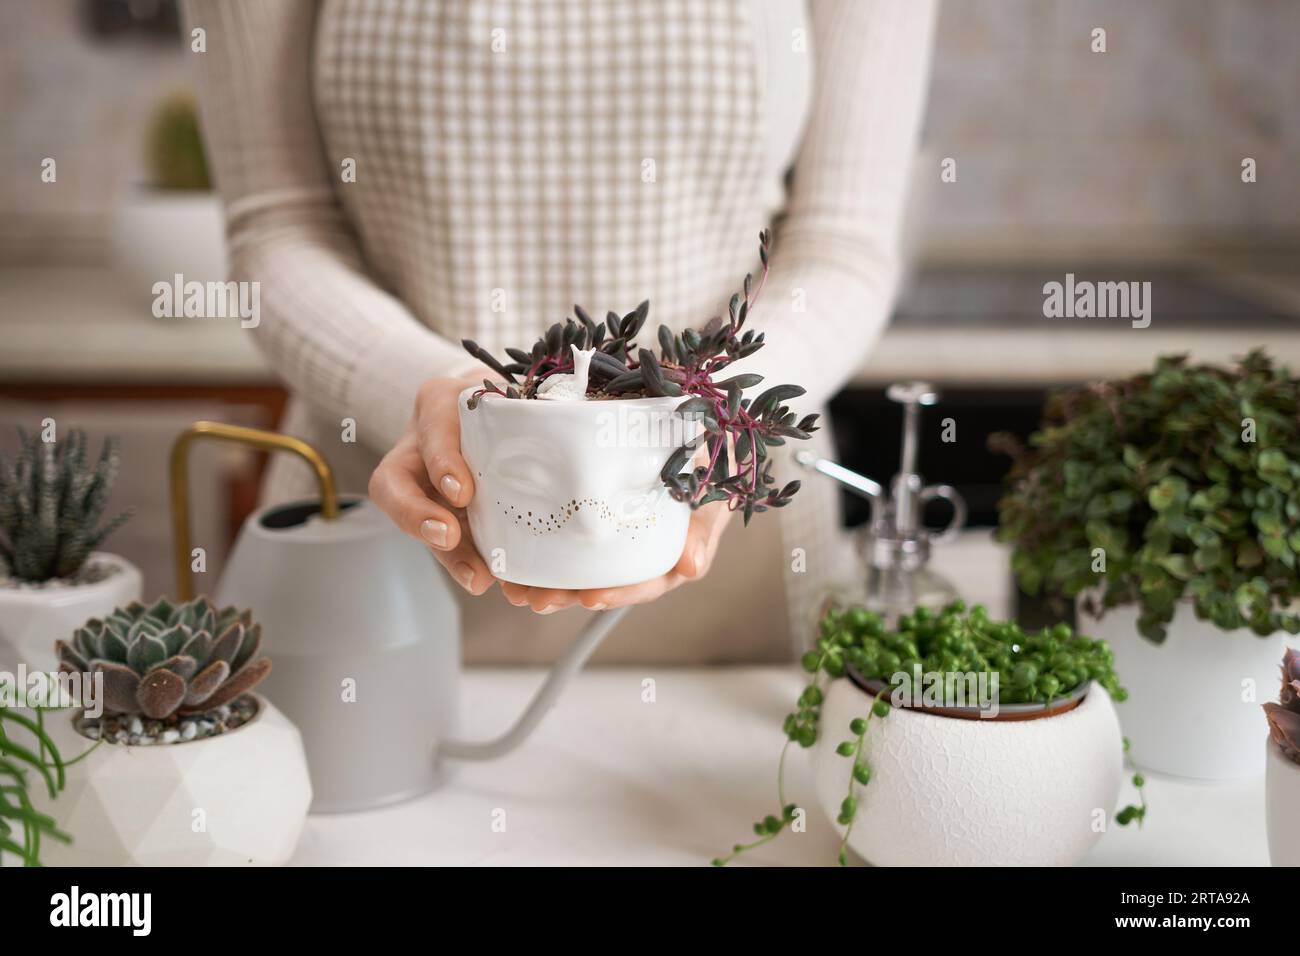 Woman holding Potted othonna capensis house plant in white ceramic pot Stock Photo